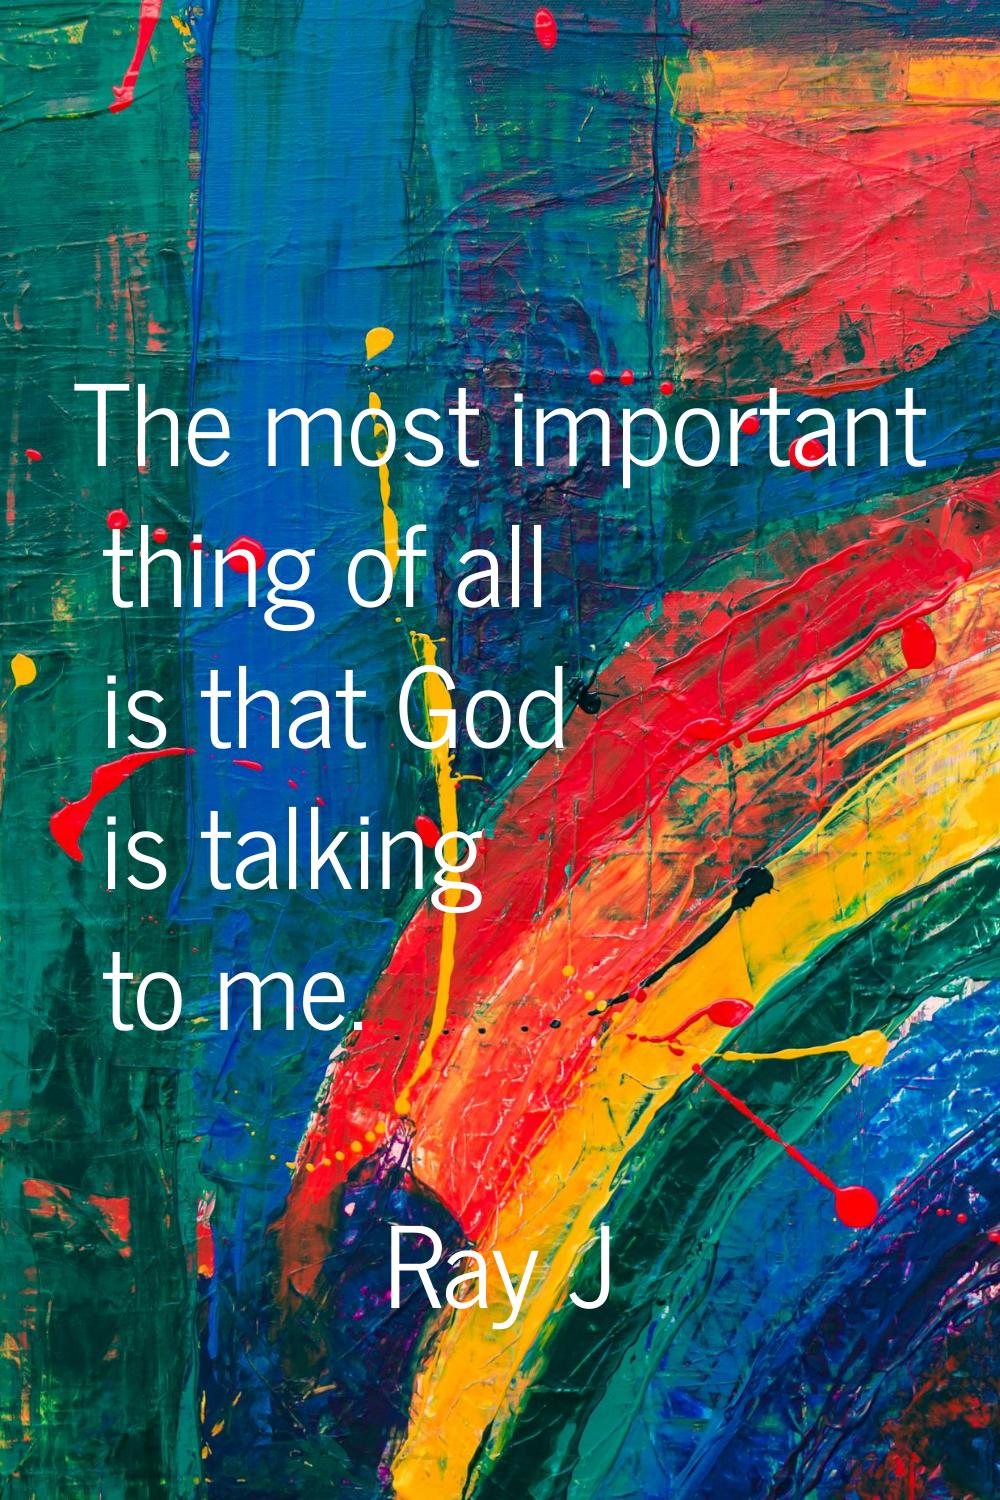 The most important thing of all is that God is talking to me.